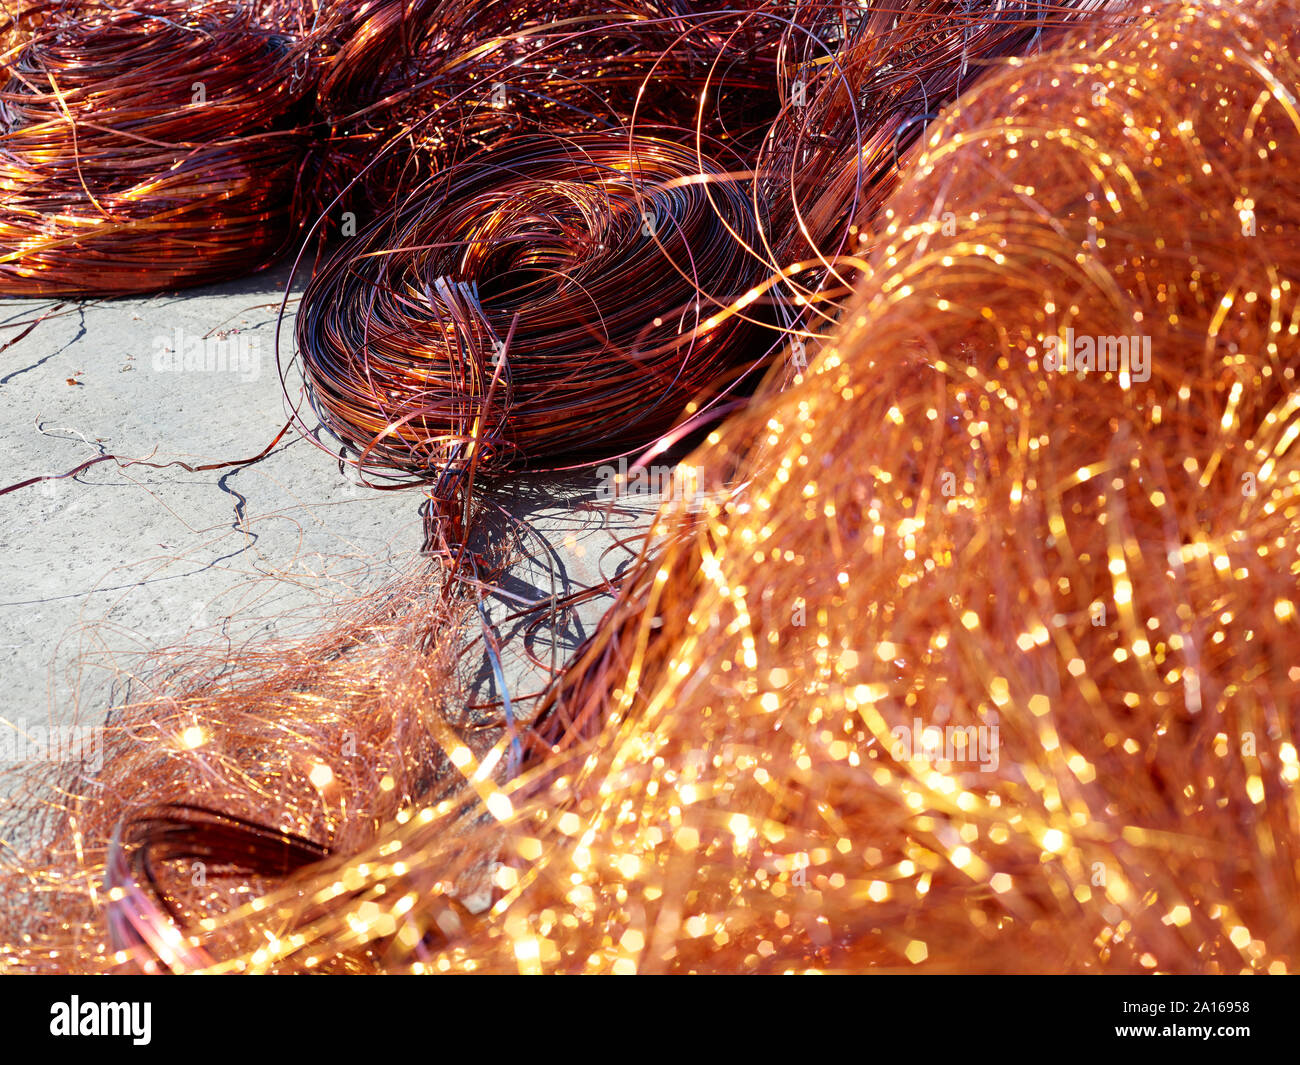 Austria, Tyrol, Brixlegg, Close-up of electronic copper wires in junkyard Stock Photo